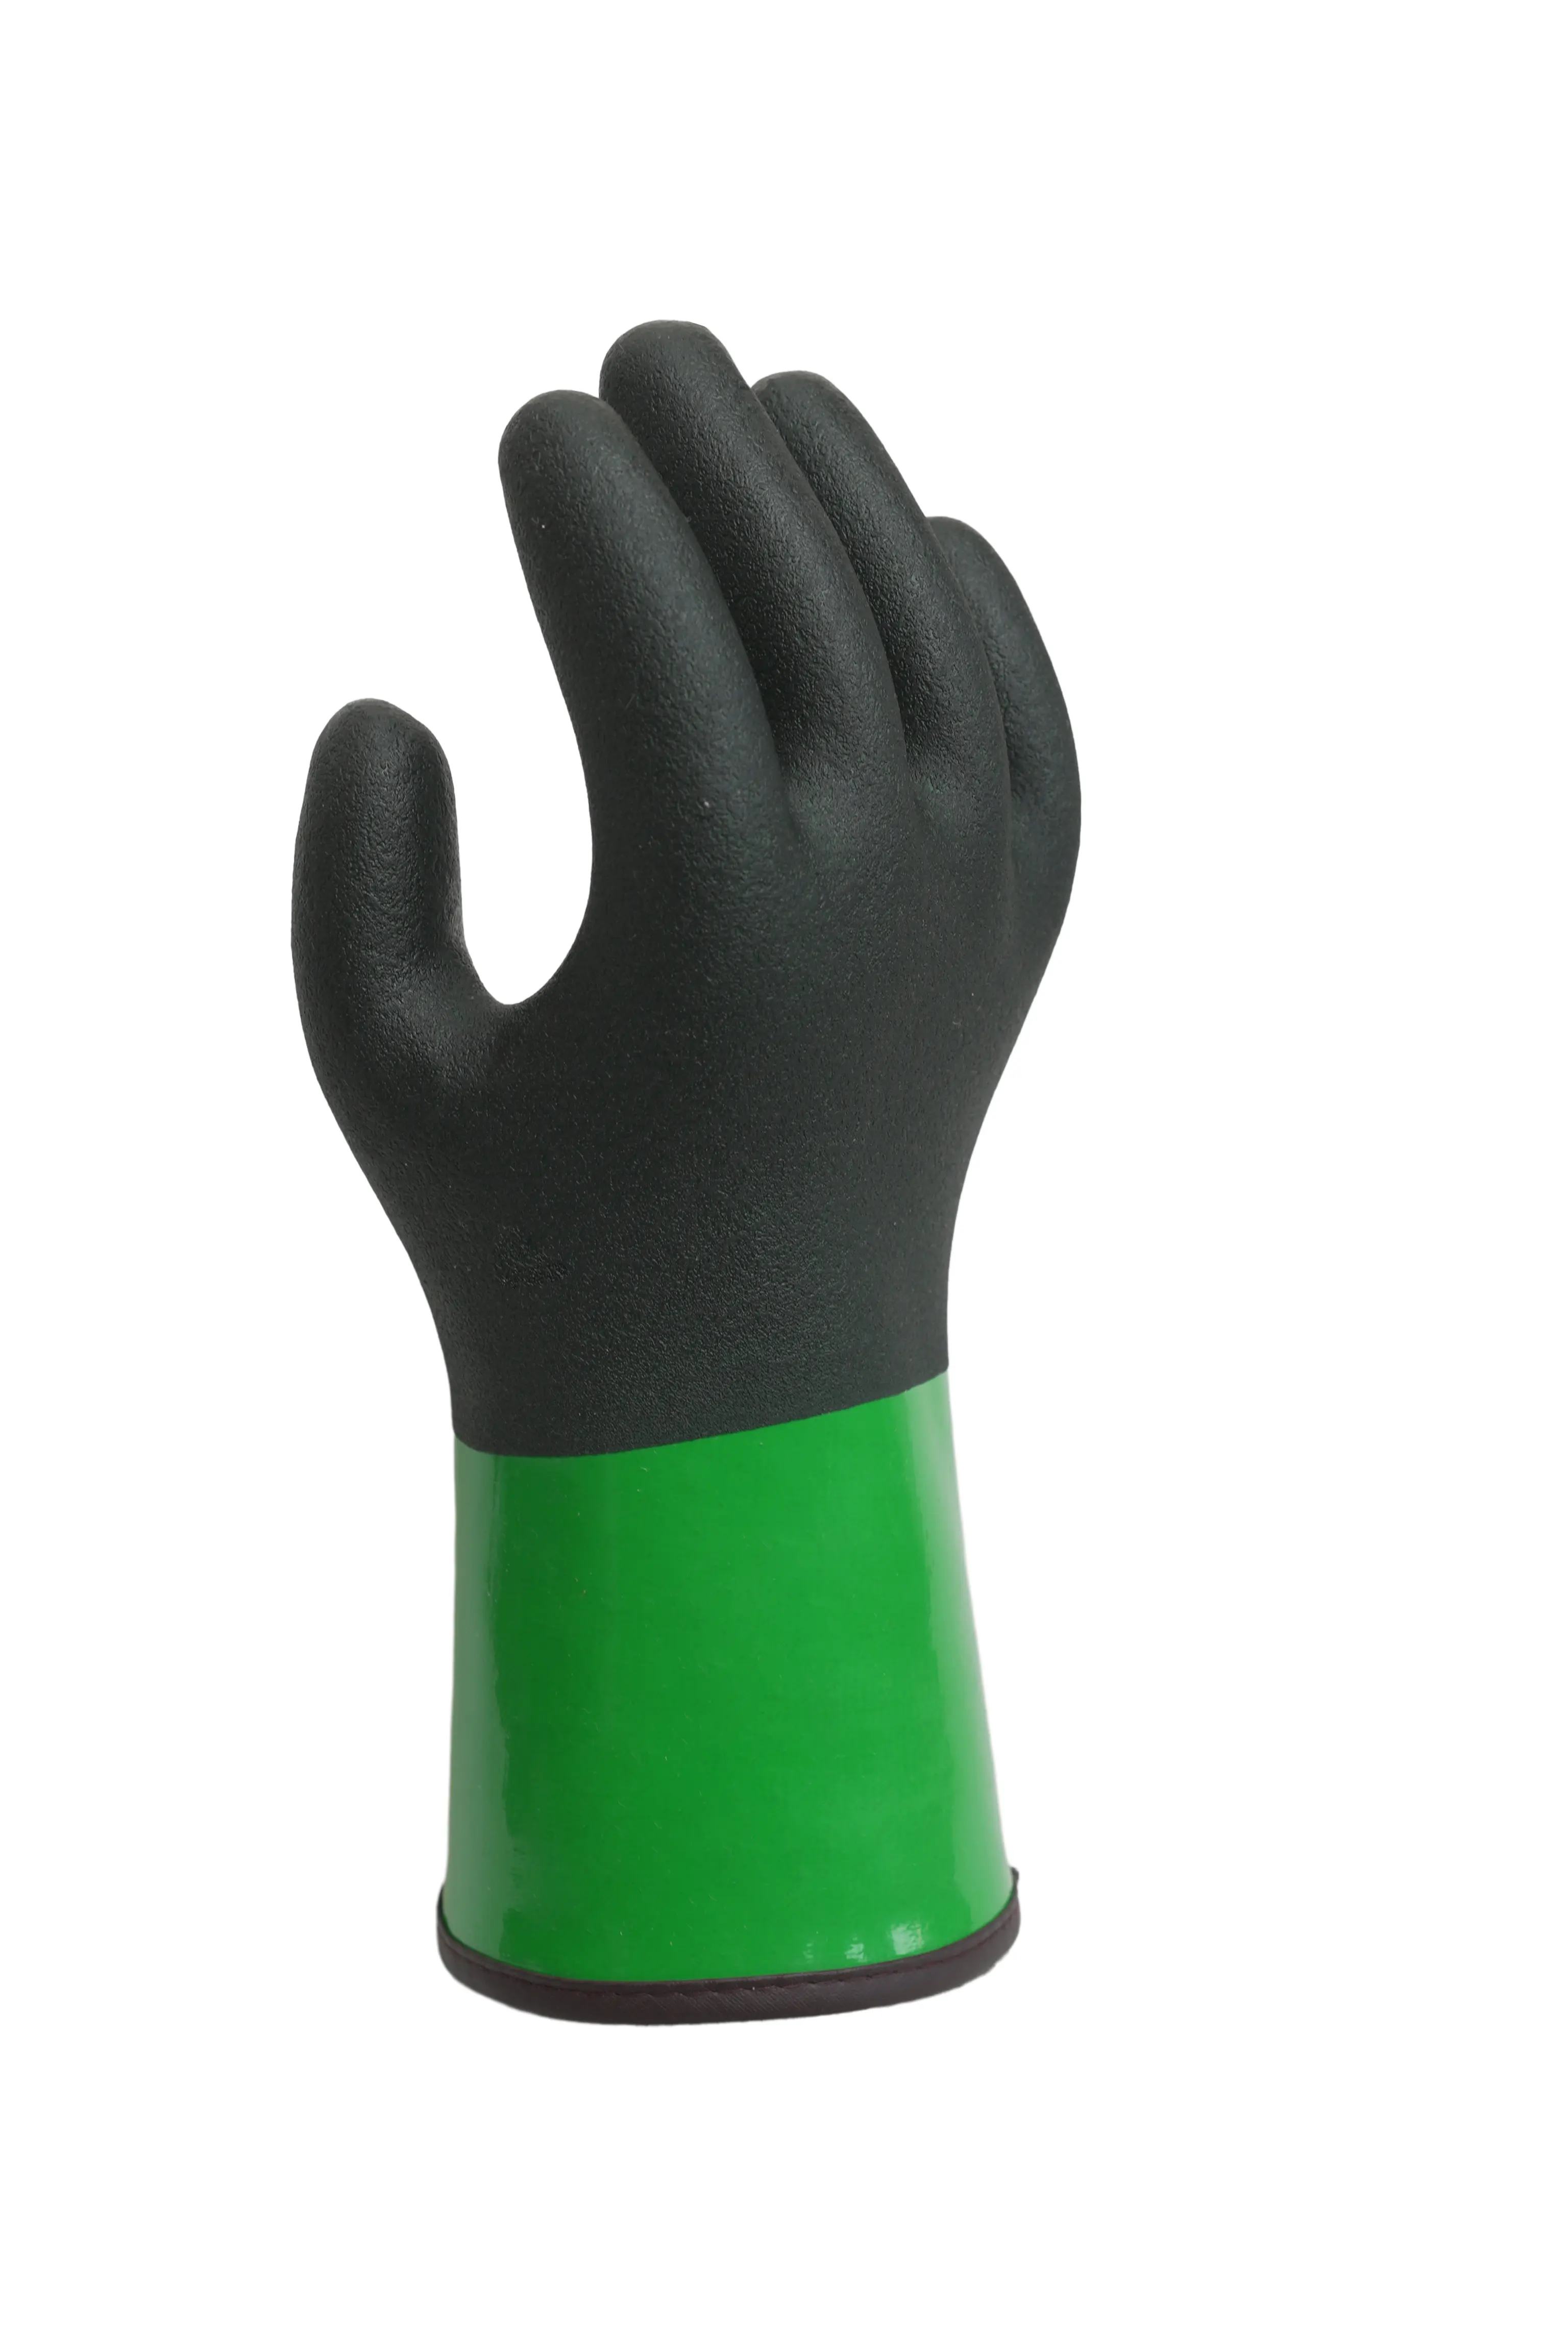 PVC/NBR fully coated glove water proof oil resistant and cut resistant chemical glove liquid resistant